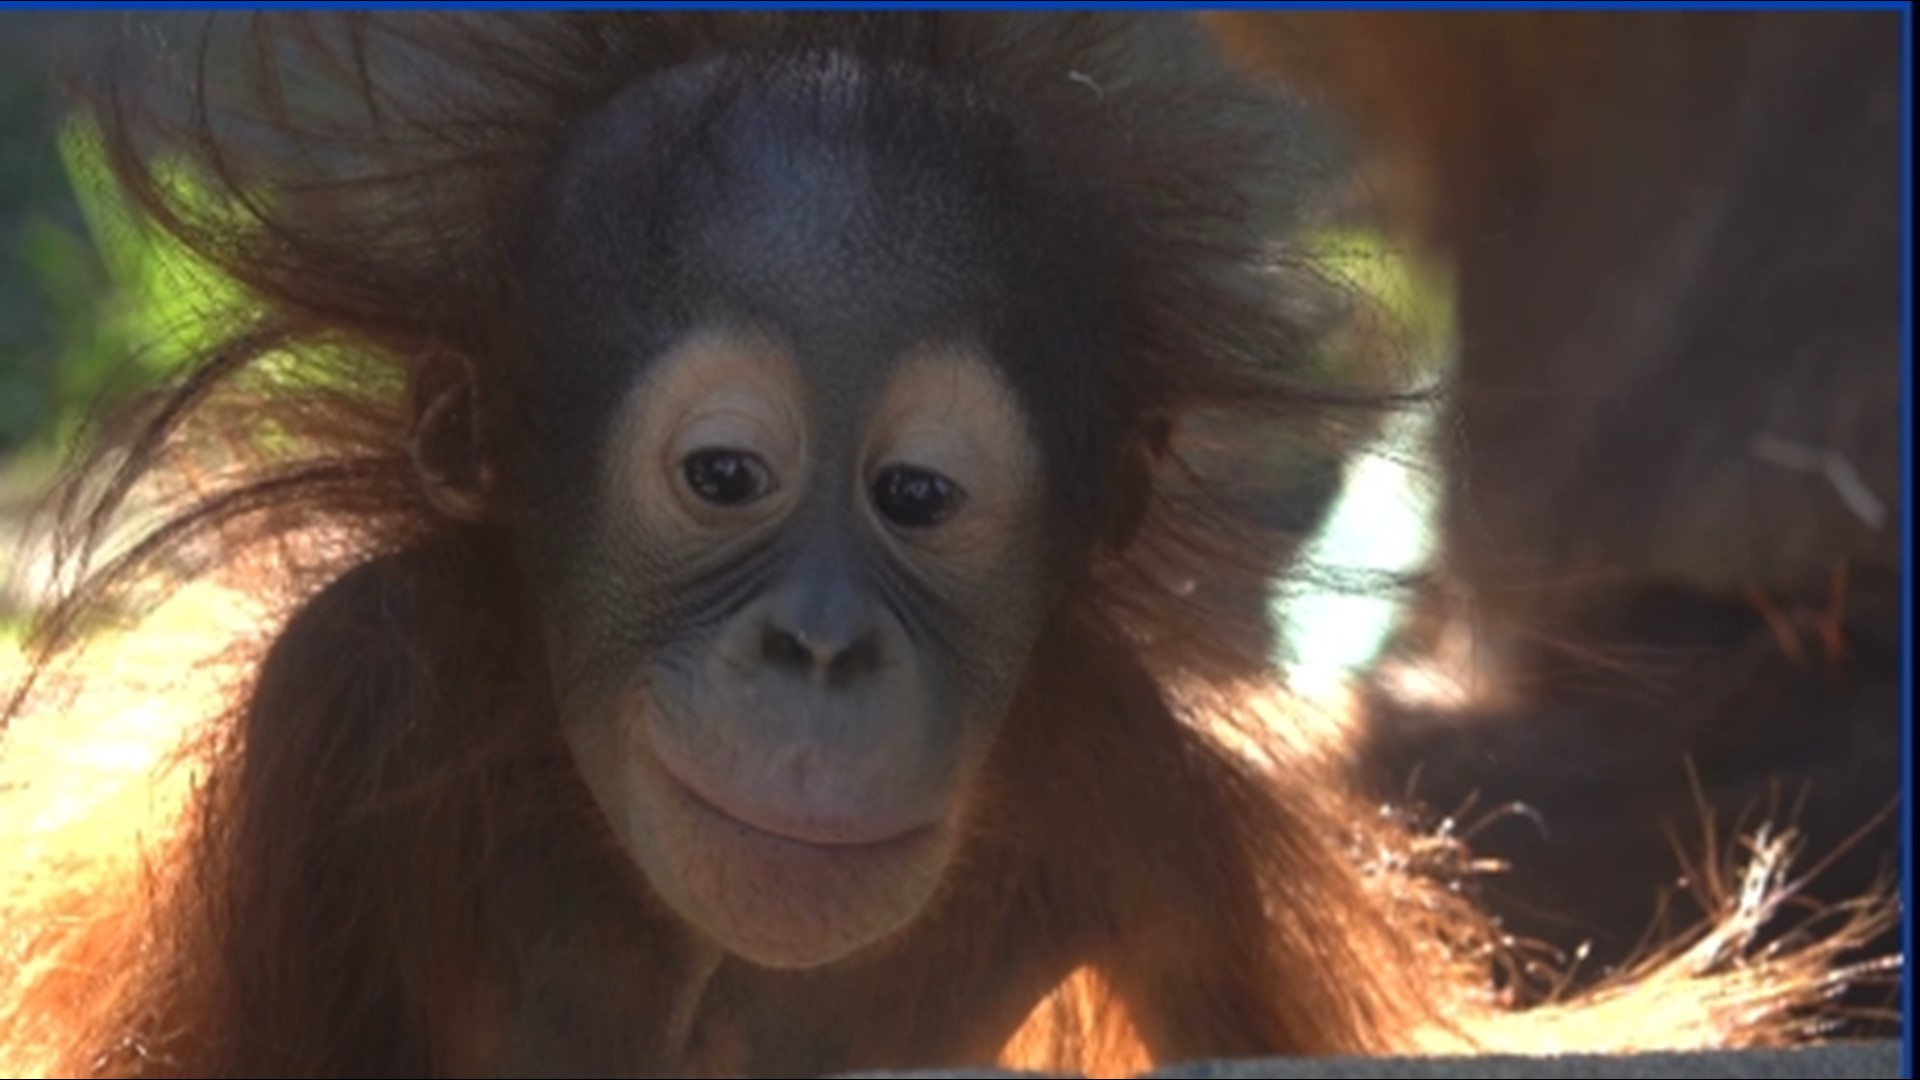 Through April 30 a portion of sales from Wine by Joe’s Pinot Noir and Pinot Gris will go to the Oregon Zoo Foundation’s orangutan conservation efforts.